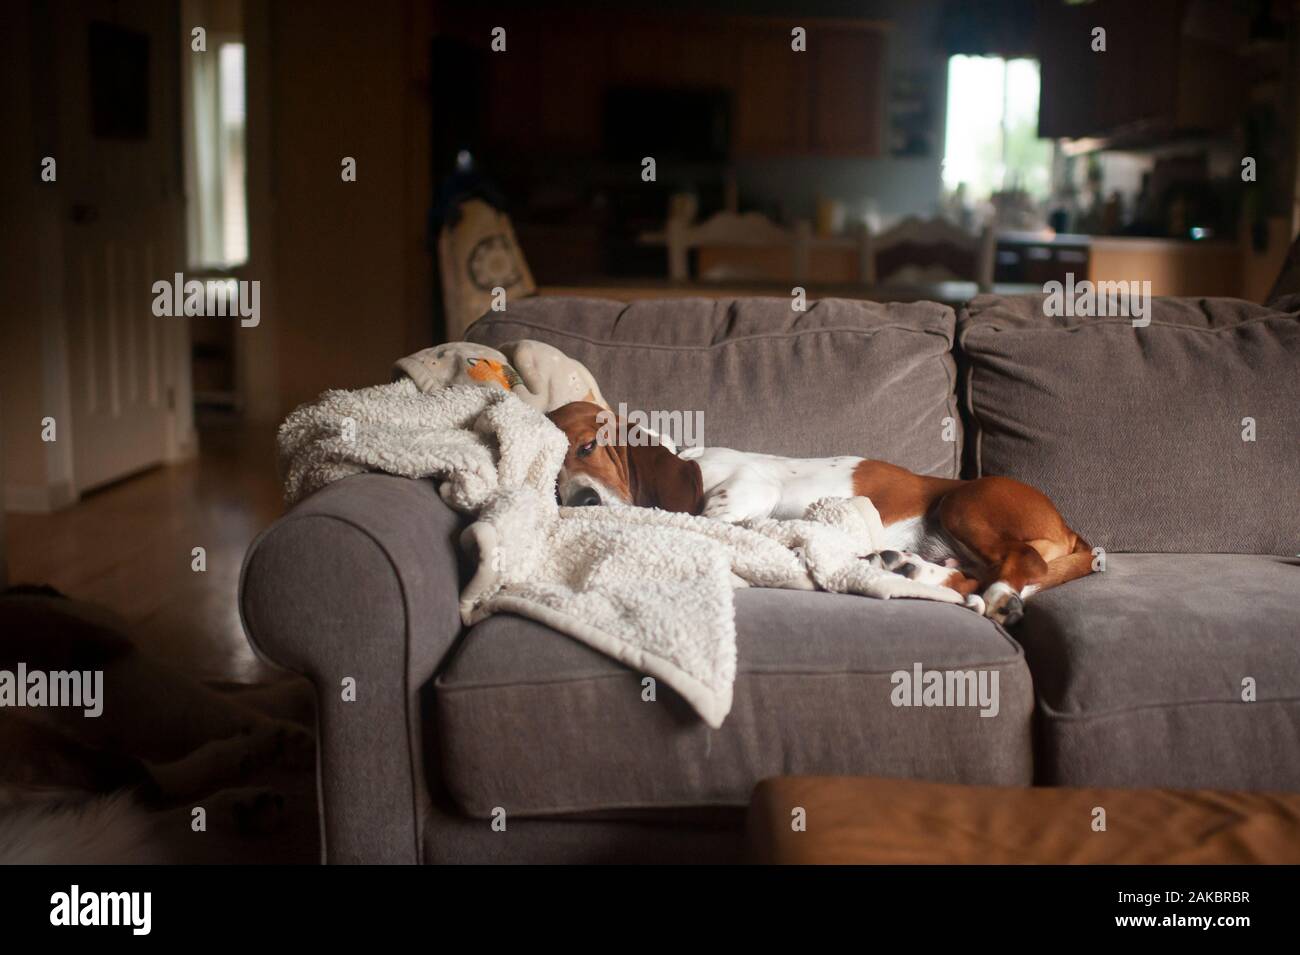 Basset Hound dog sleeping on couch at home in living room Stock Photo